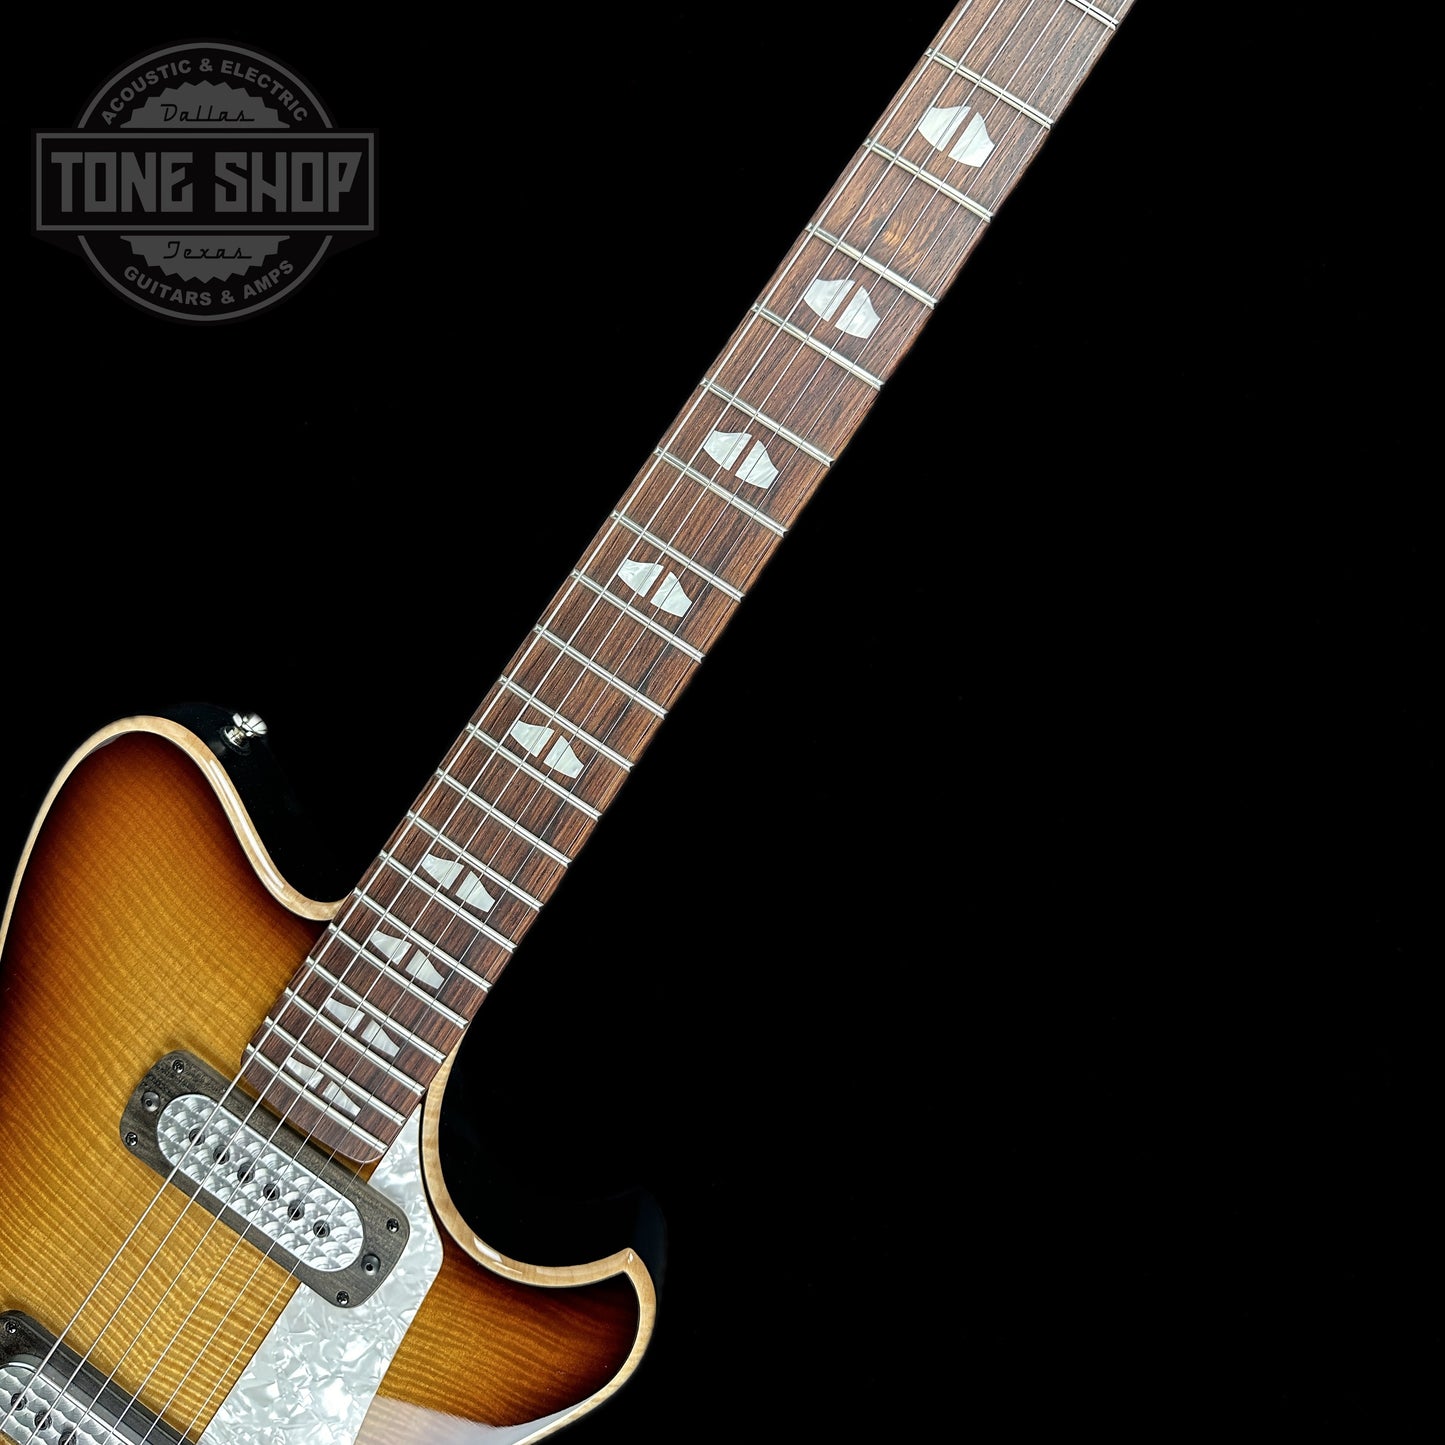 Fretboard of Powers Electric A-Type Select Maple Solana Sunset FF42 Pearl Delrin Warm.